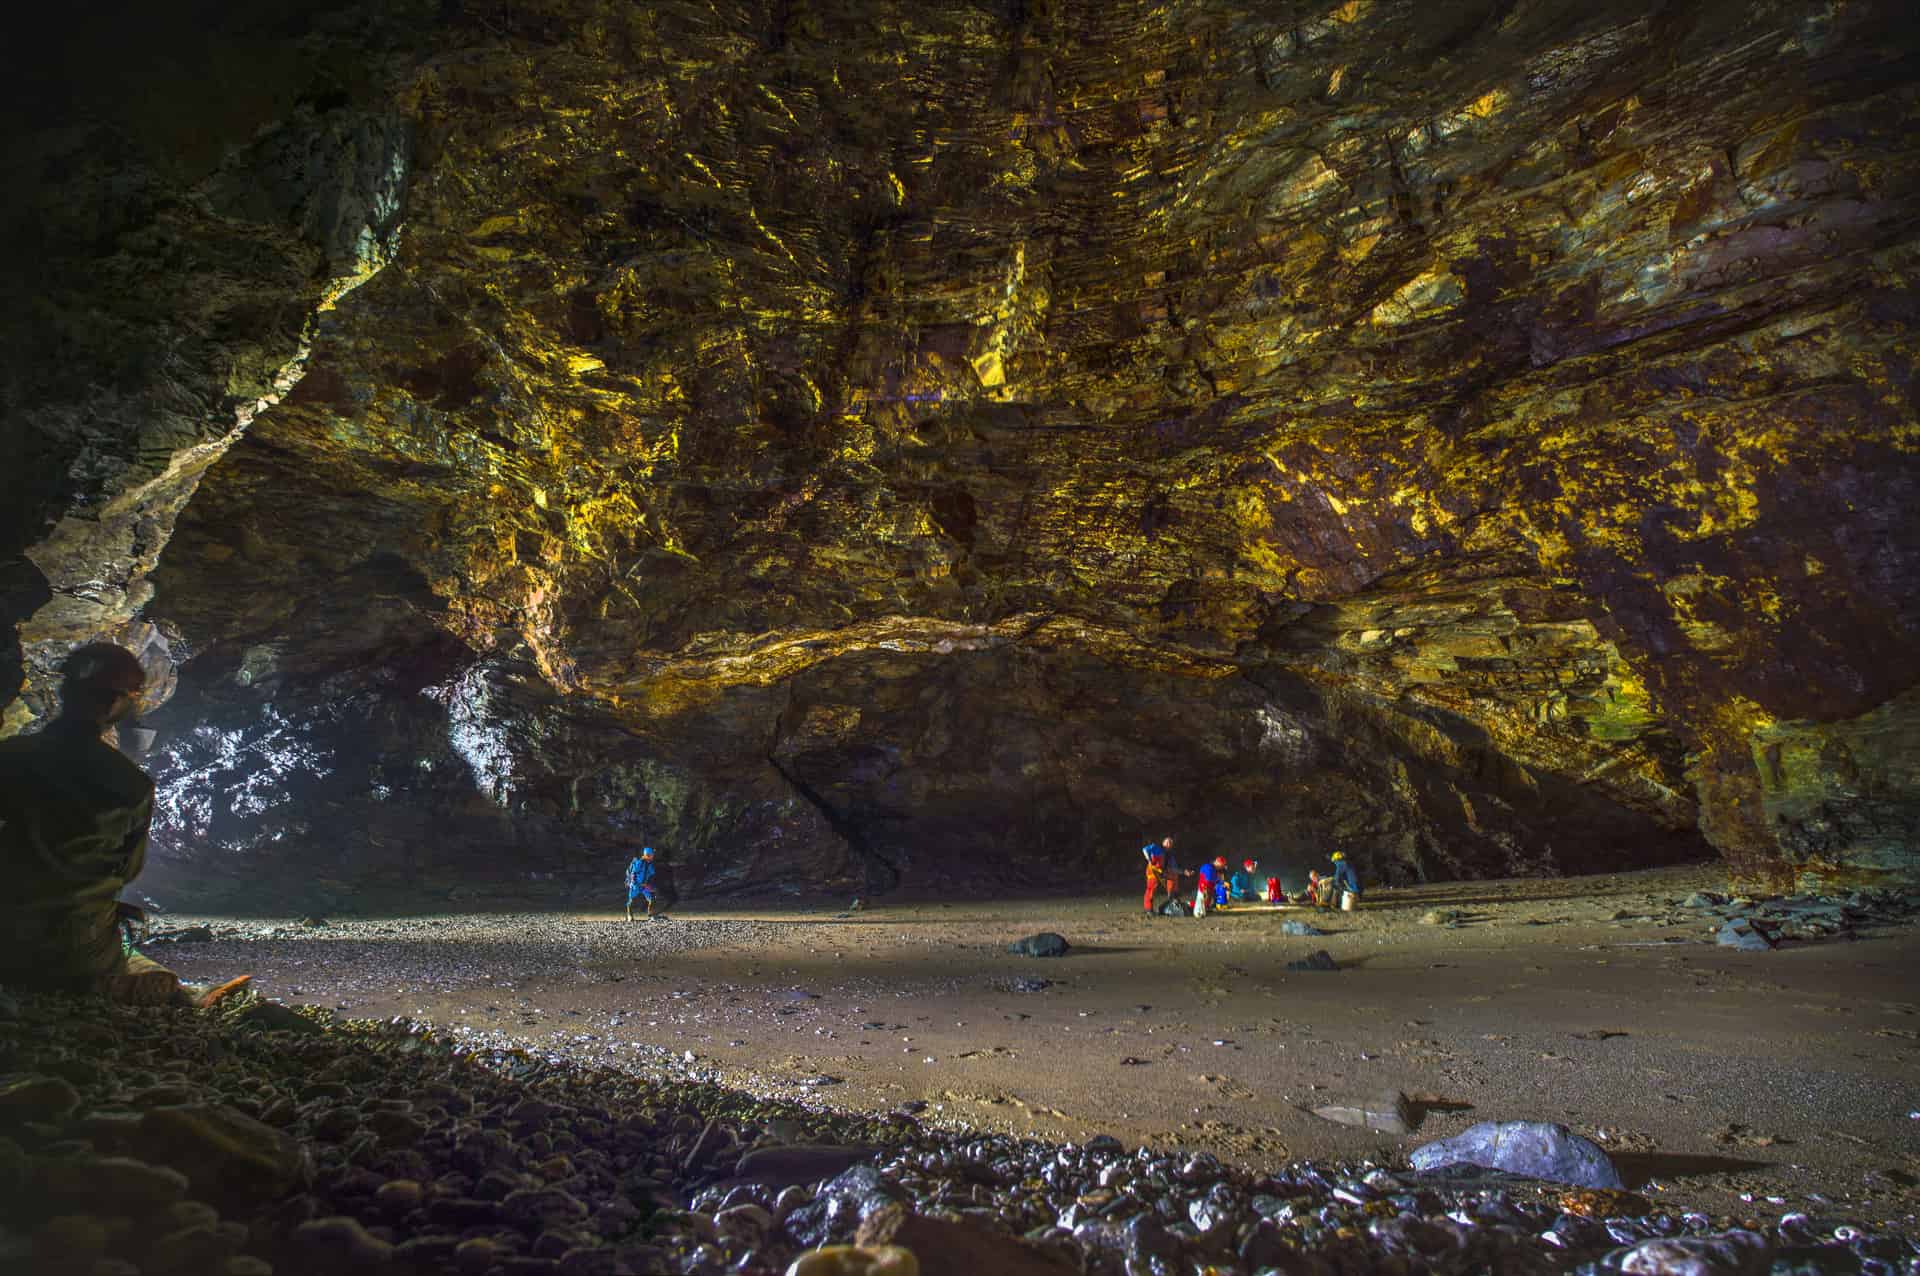 Exploring a Sea Cave Mine, a uniquely Cornish phenomenon, with Kernow Coasteering and Cornwall Underground Adventures. Phot by B